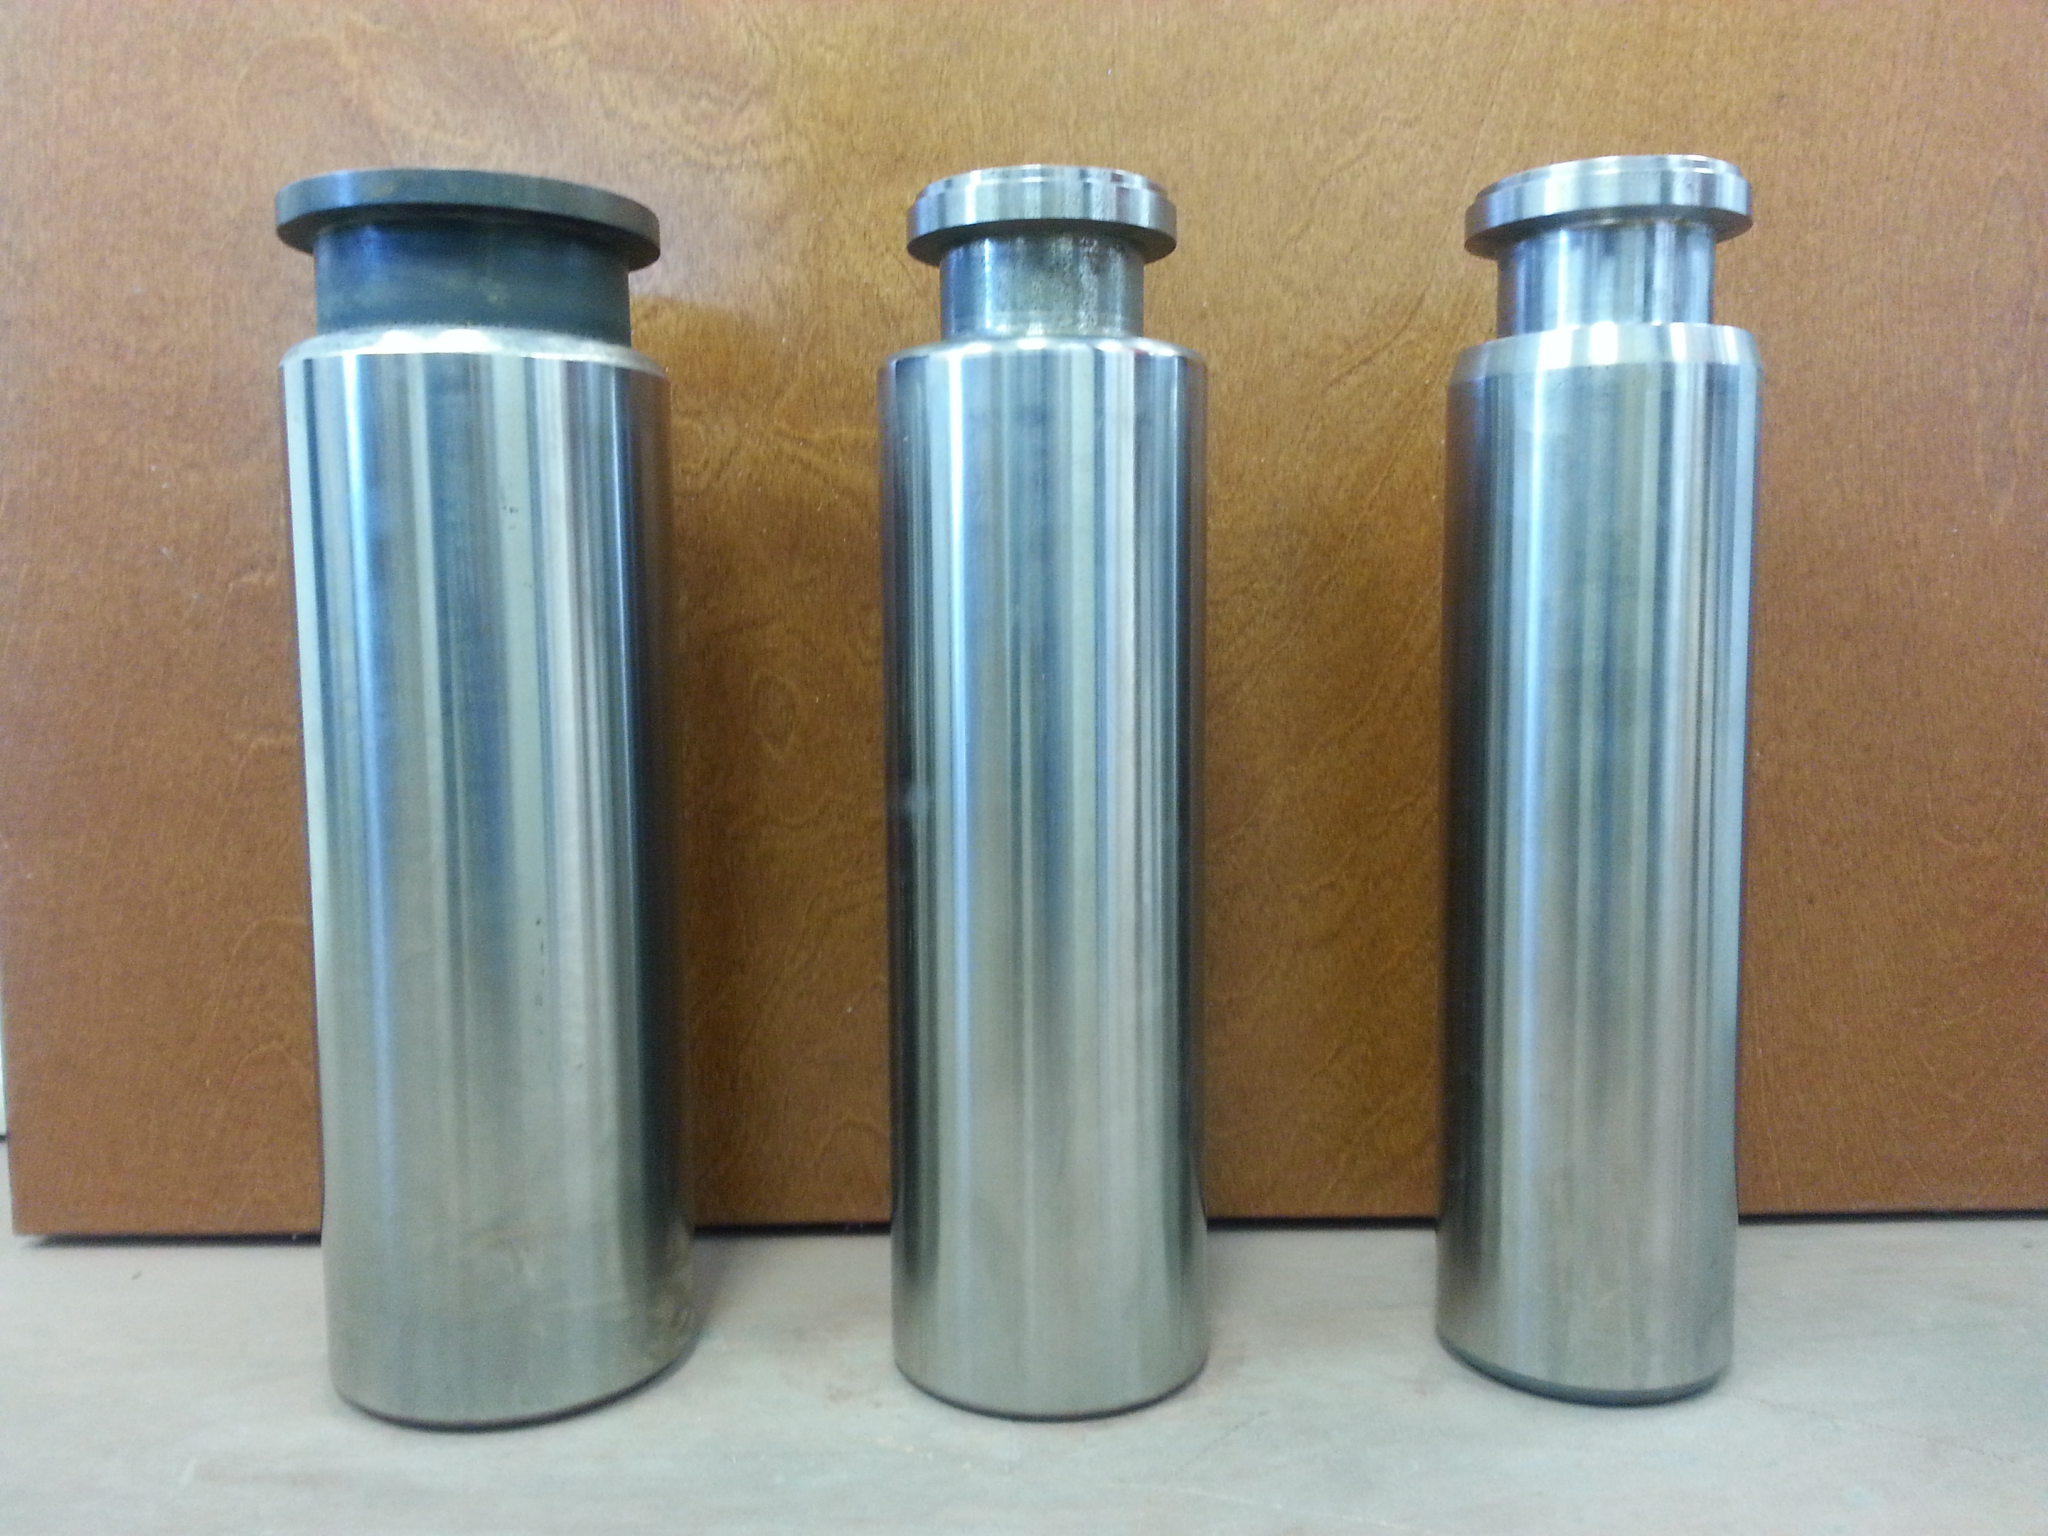 Silver cylinders